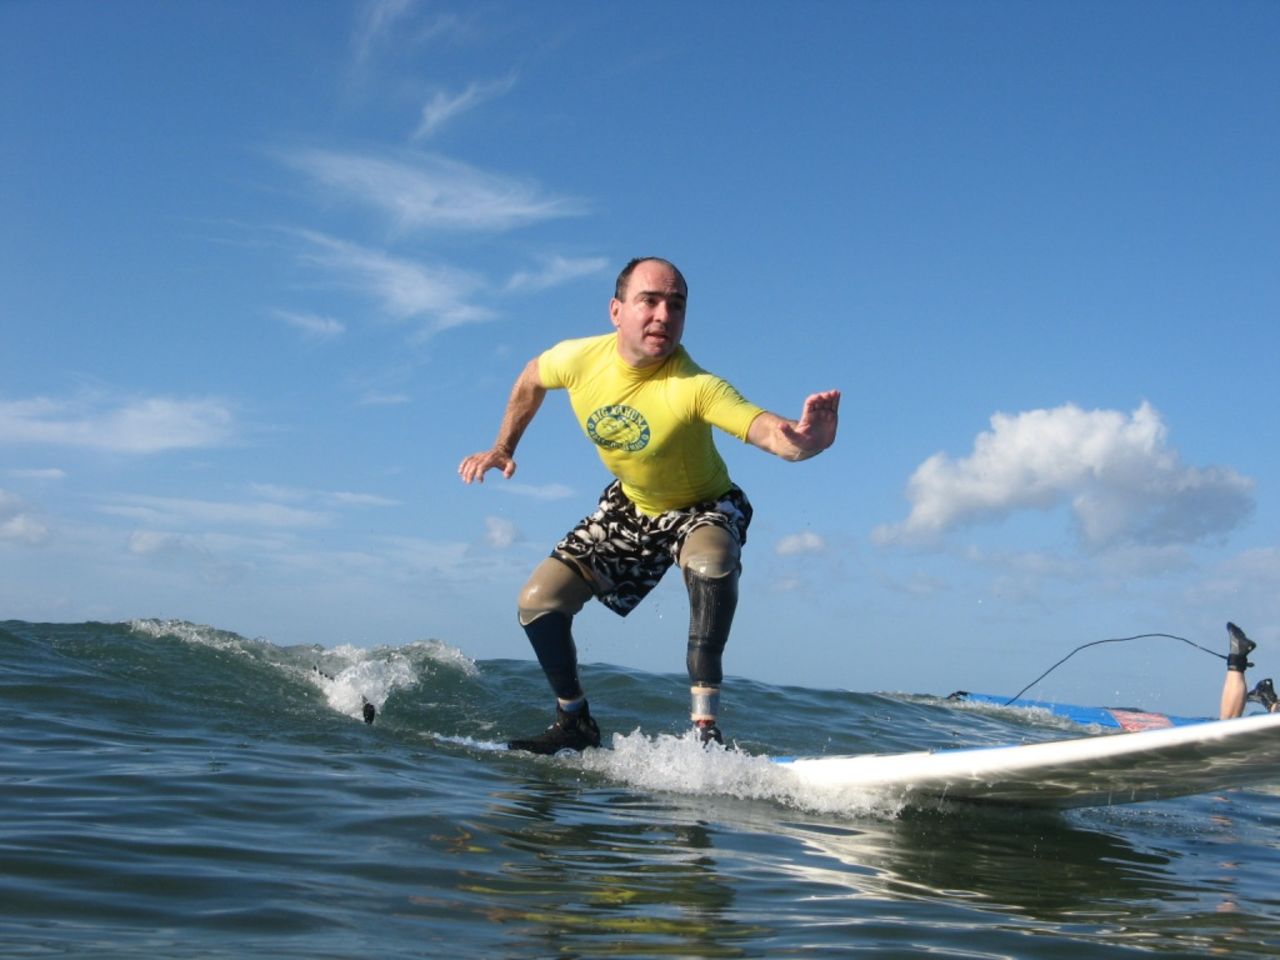 Cain enjoys and competes in a variety of adaptive sports, including surfing.